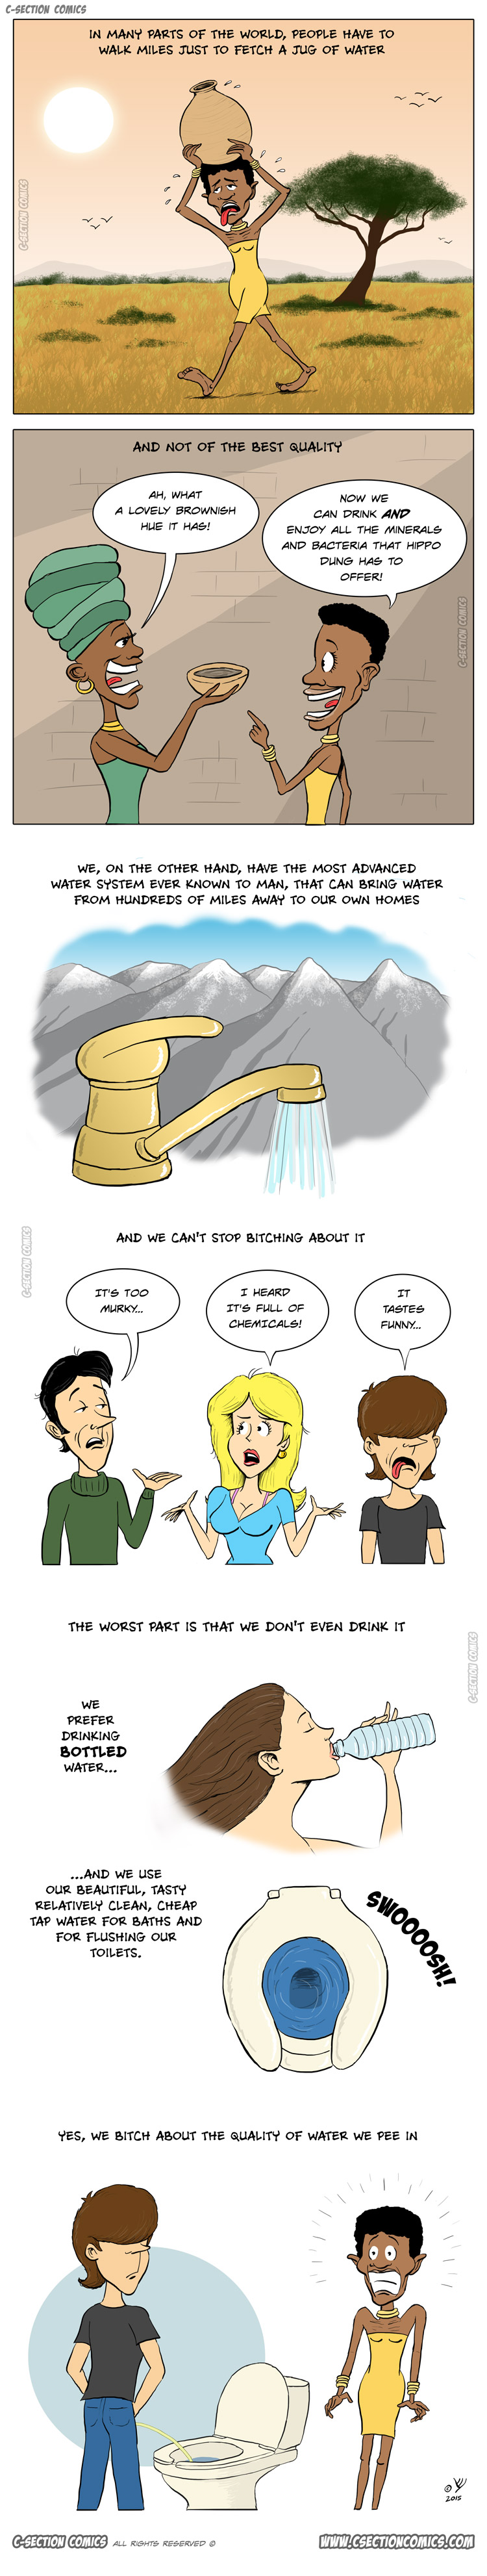 The Terrible Way We Treat Our Water - cartoon by C-Section Comics